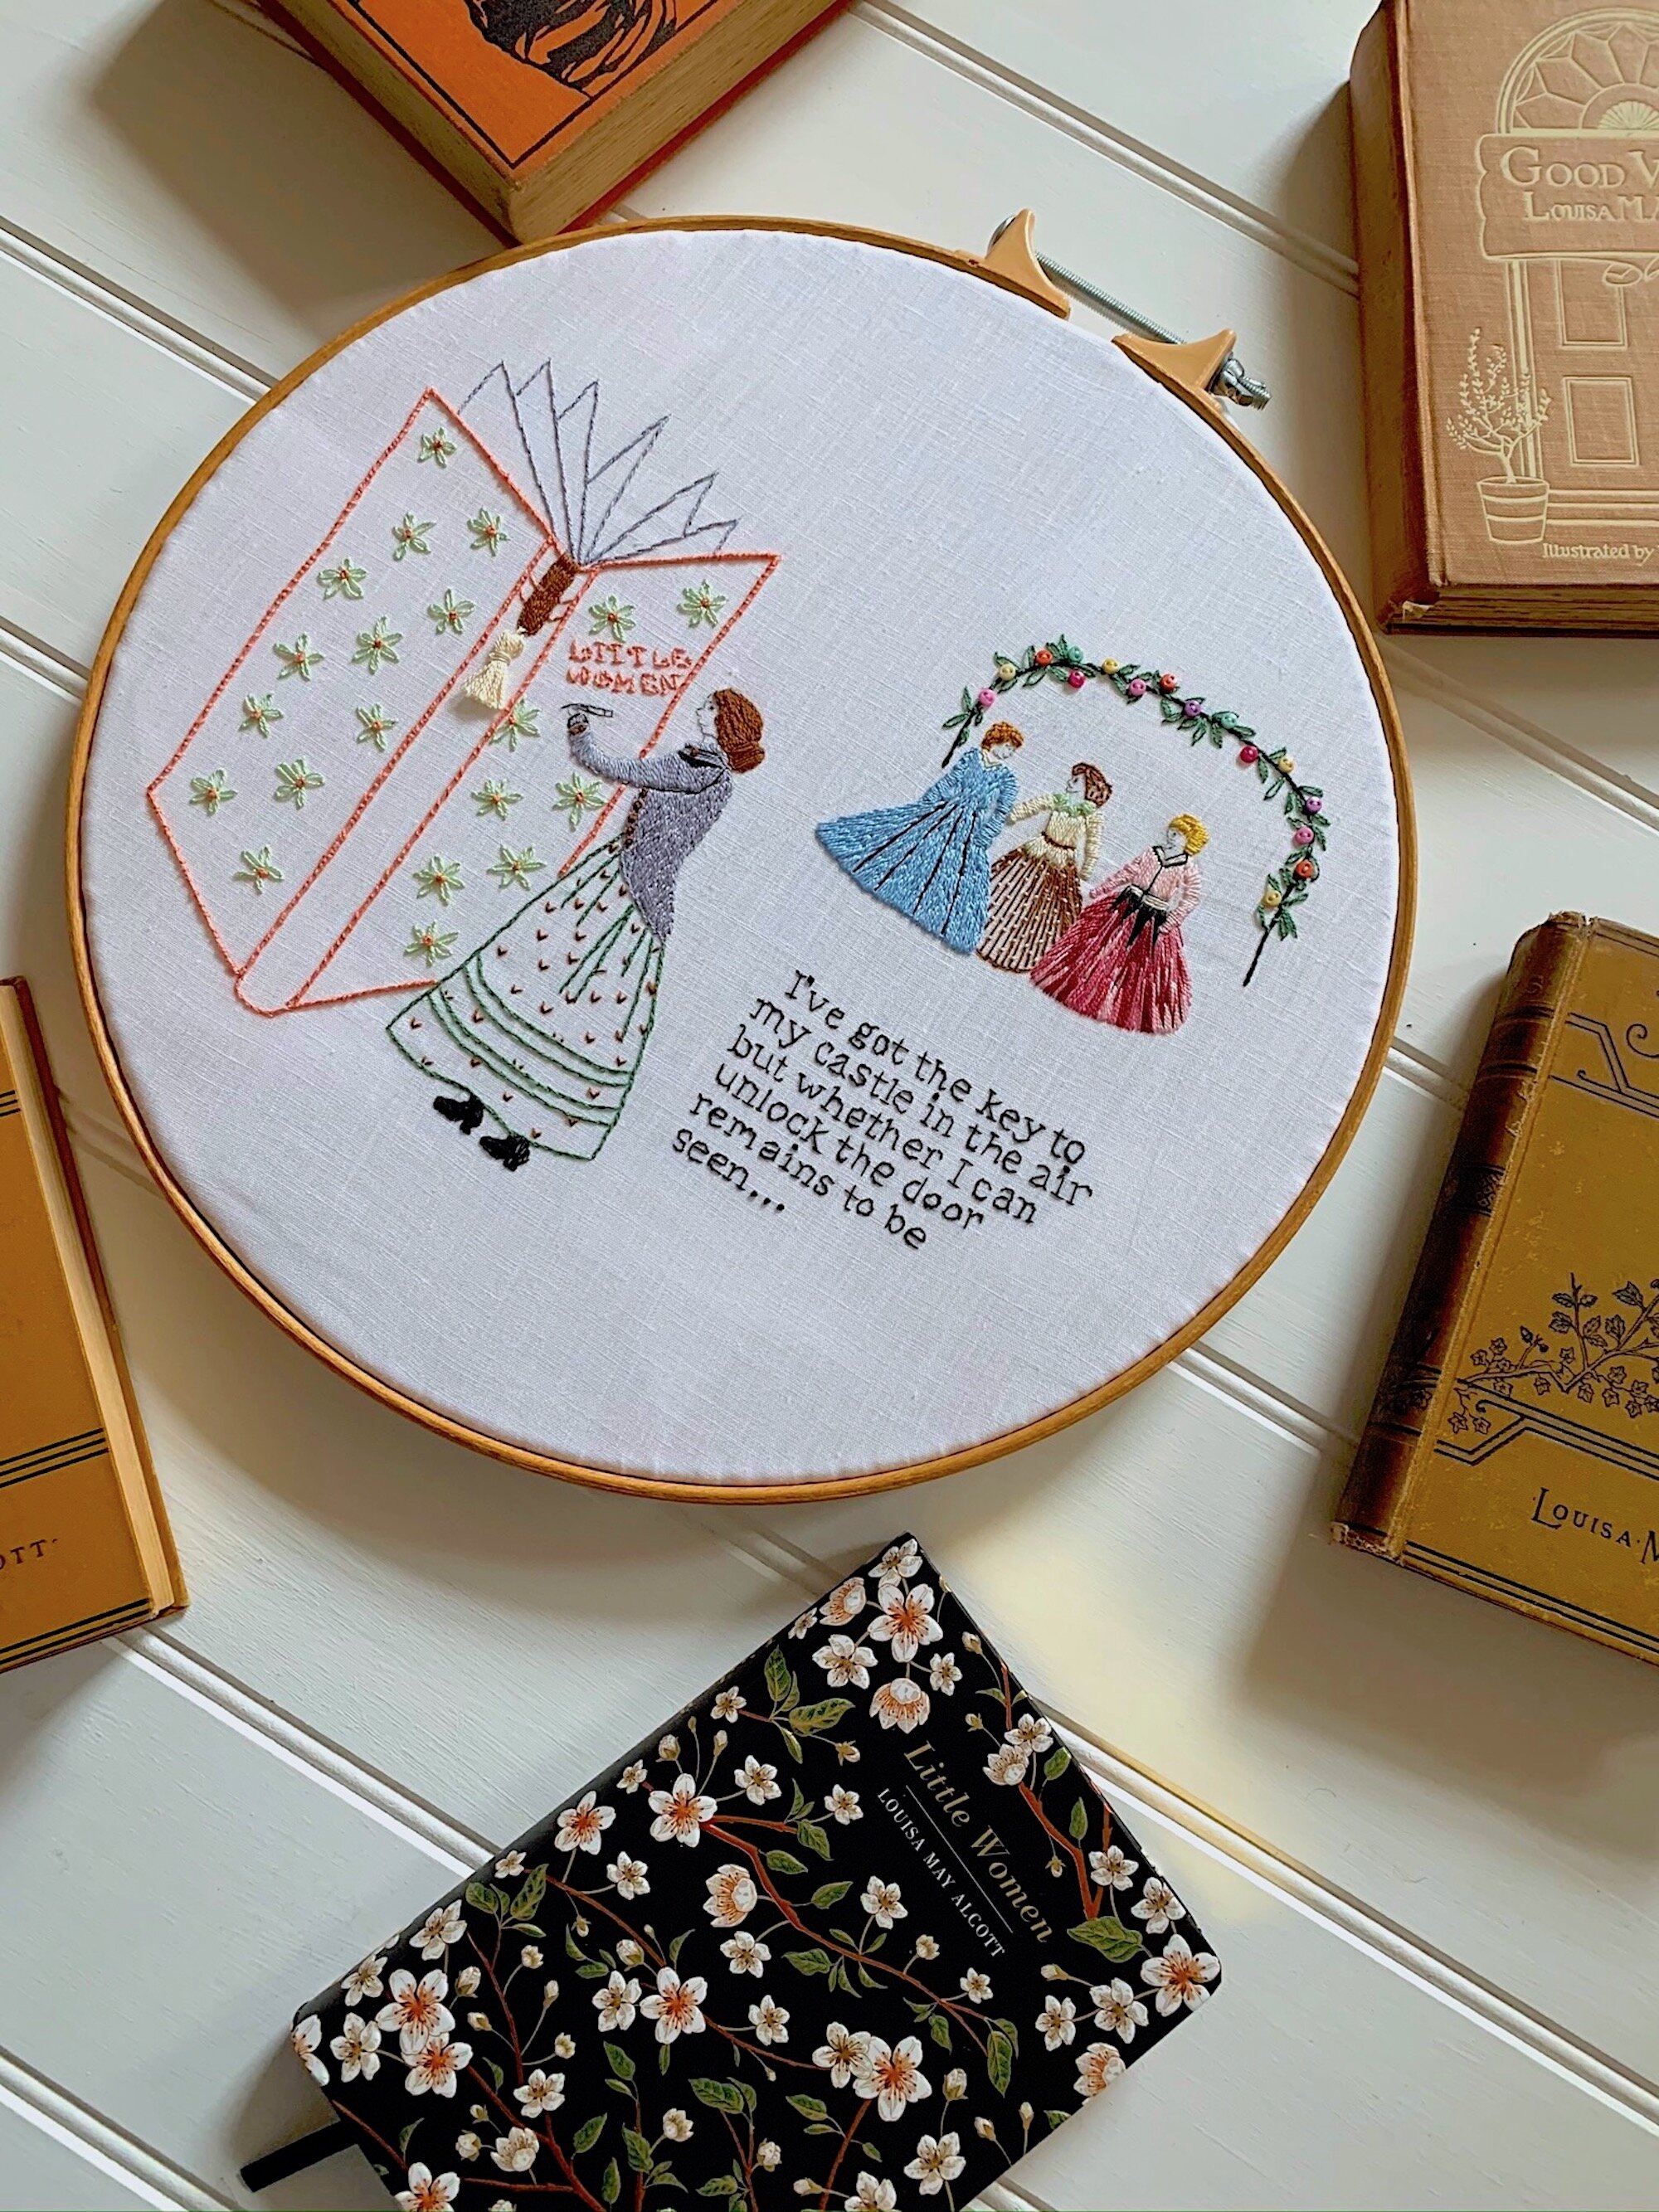 Little Women embroidery and books copy.jpg